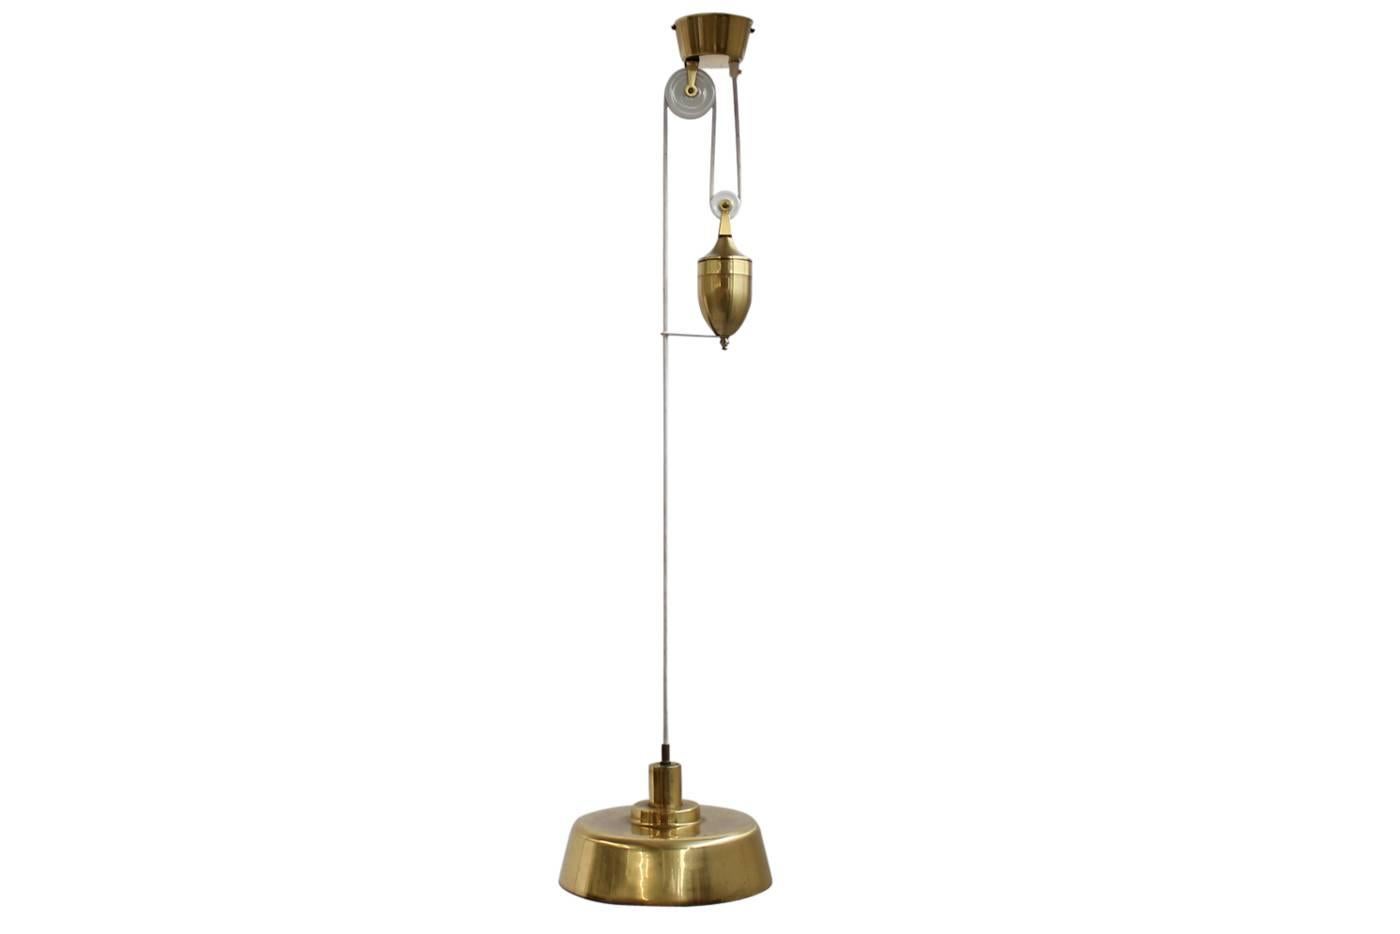 Beautiful counterweight pendant lamp, brass, ceramic wheels, nice mechanism, good condition. Measures: Diameter circa 30cm, height adjustable.
Special: Free shipping worldwide!